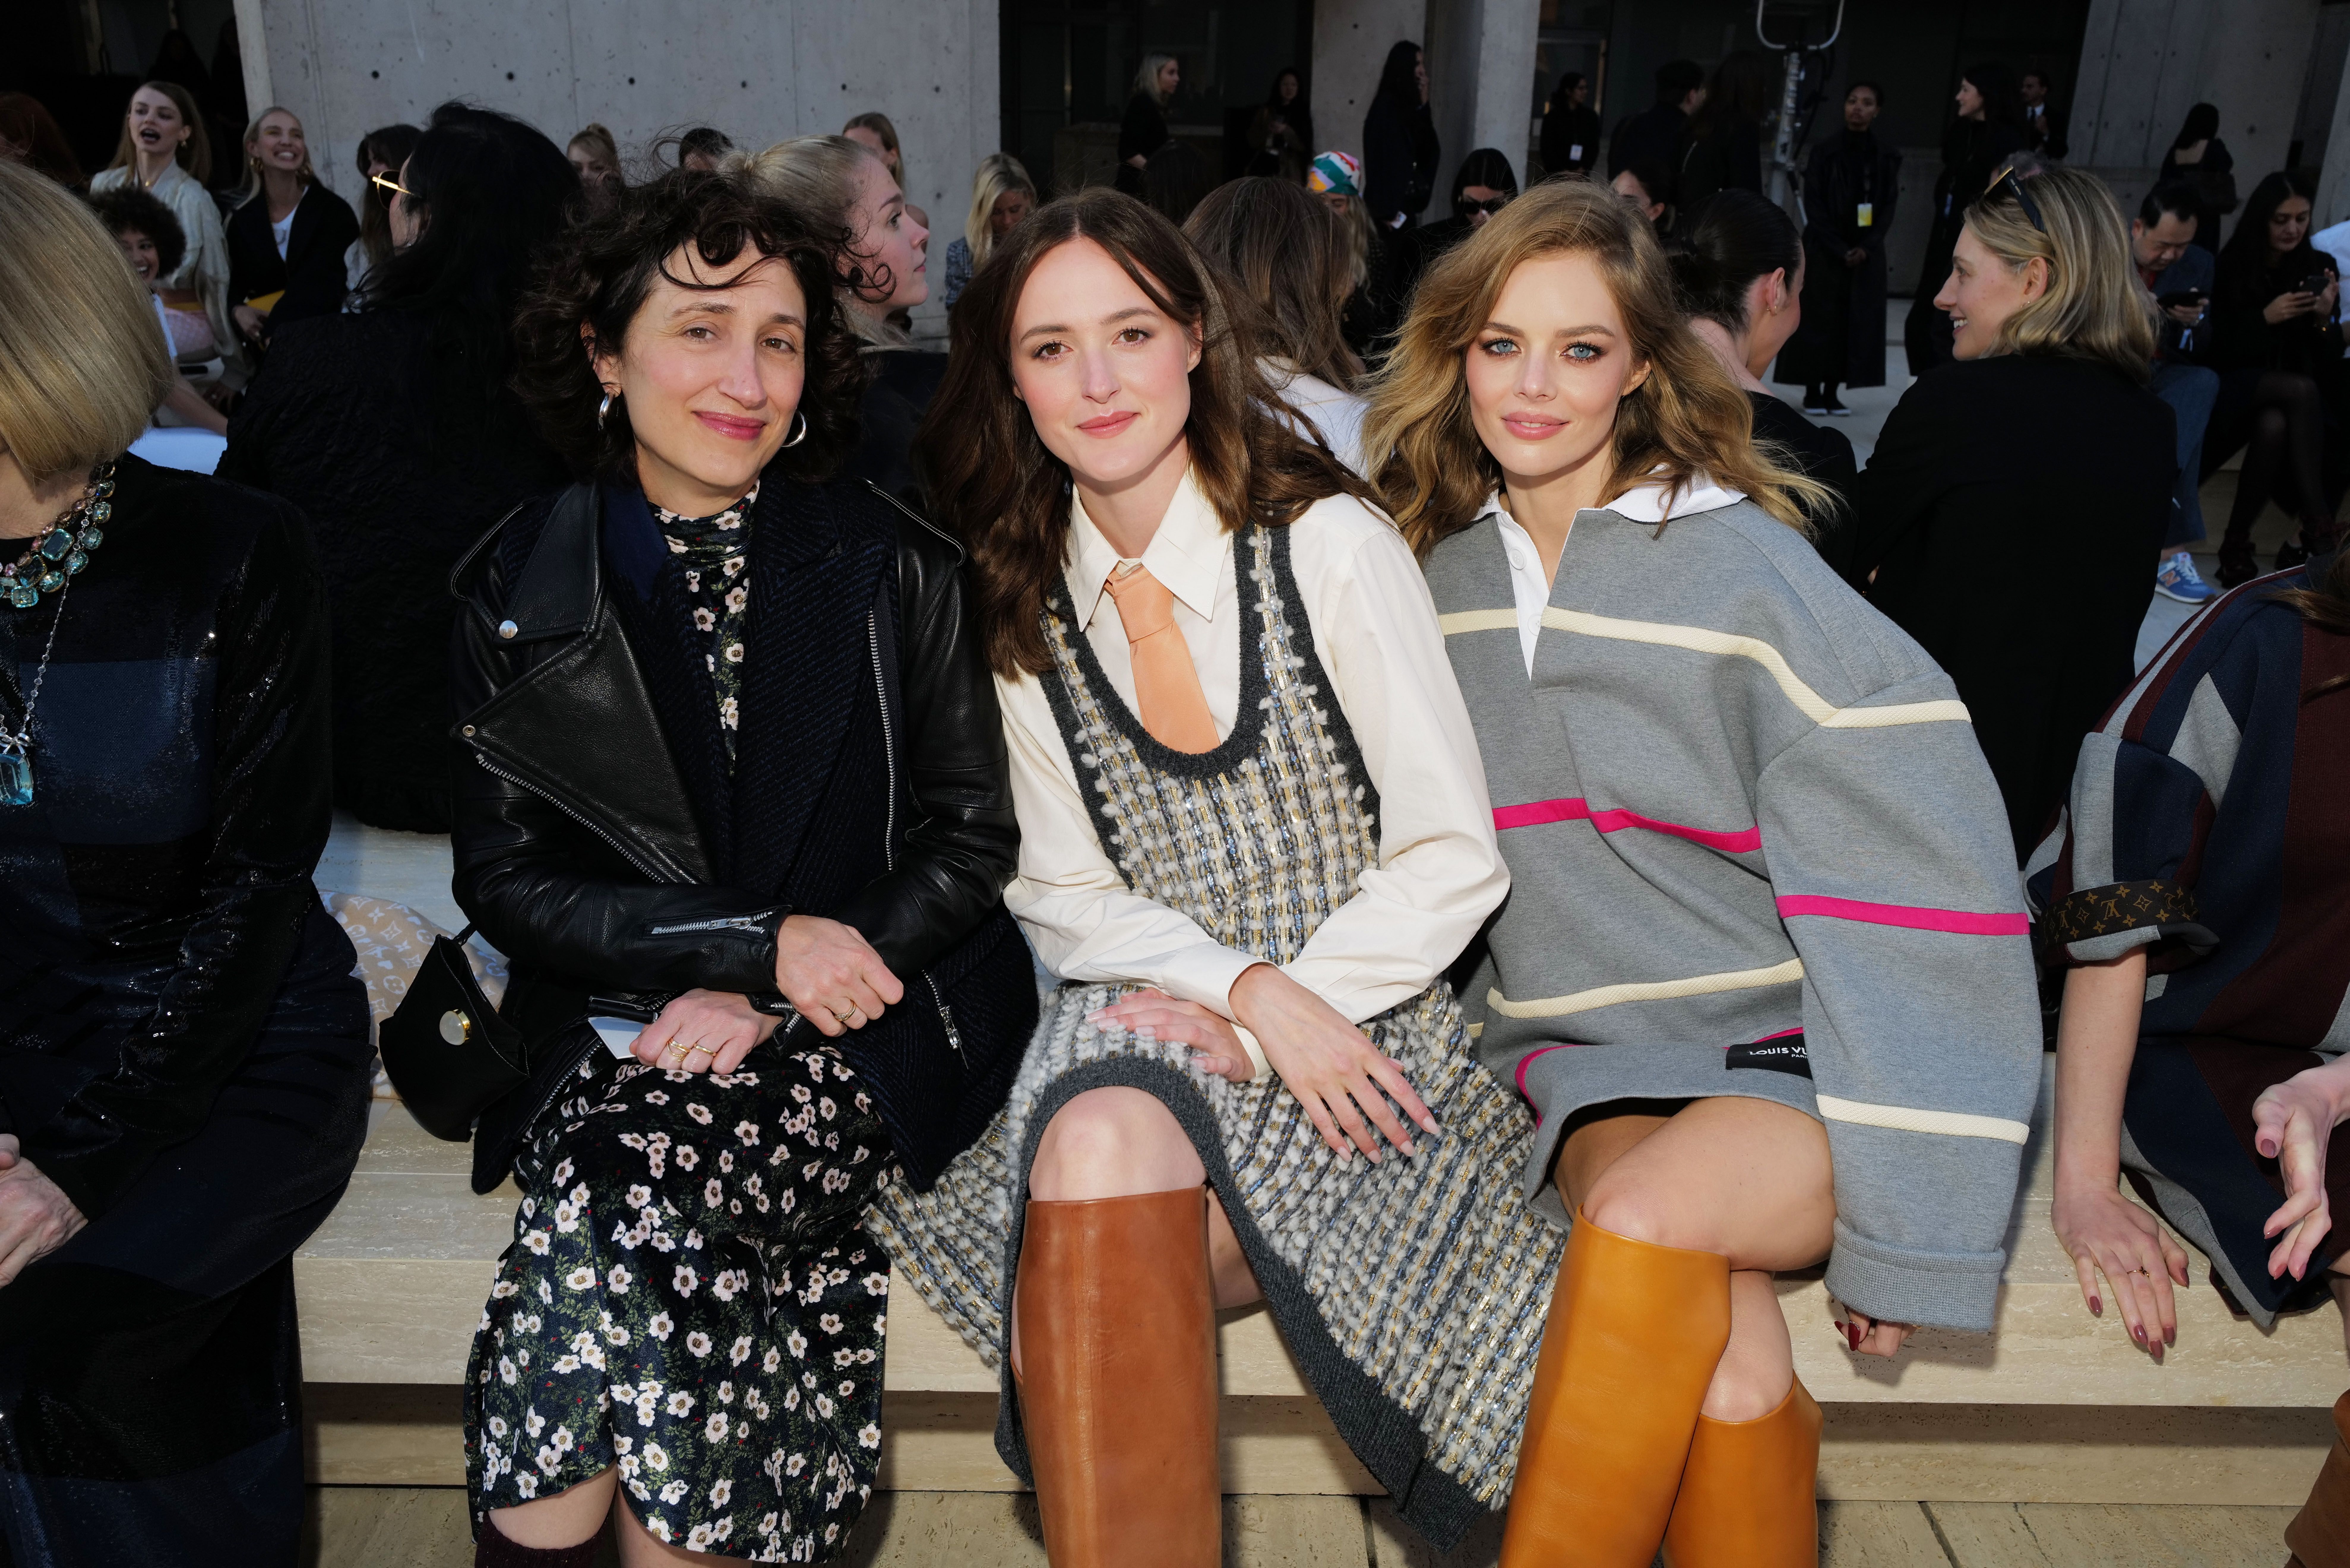 Louis Vuitton's Cruise 2019 Front Row Had an On-Brand Look for